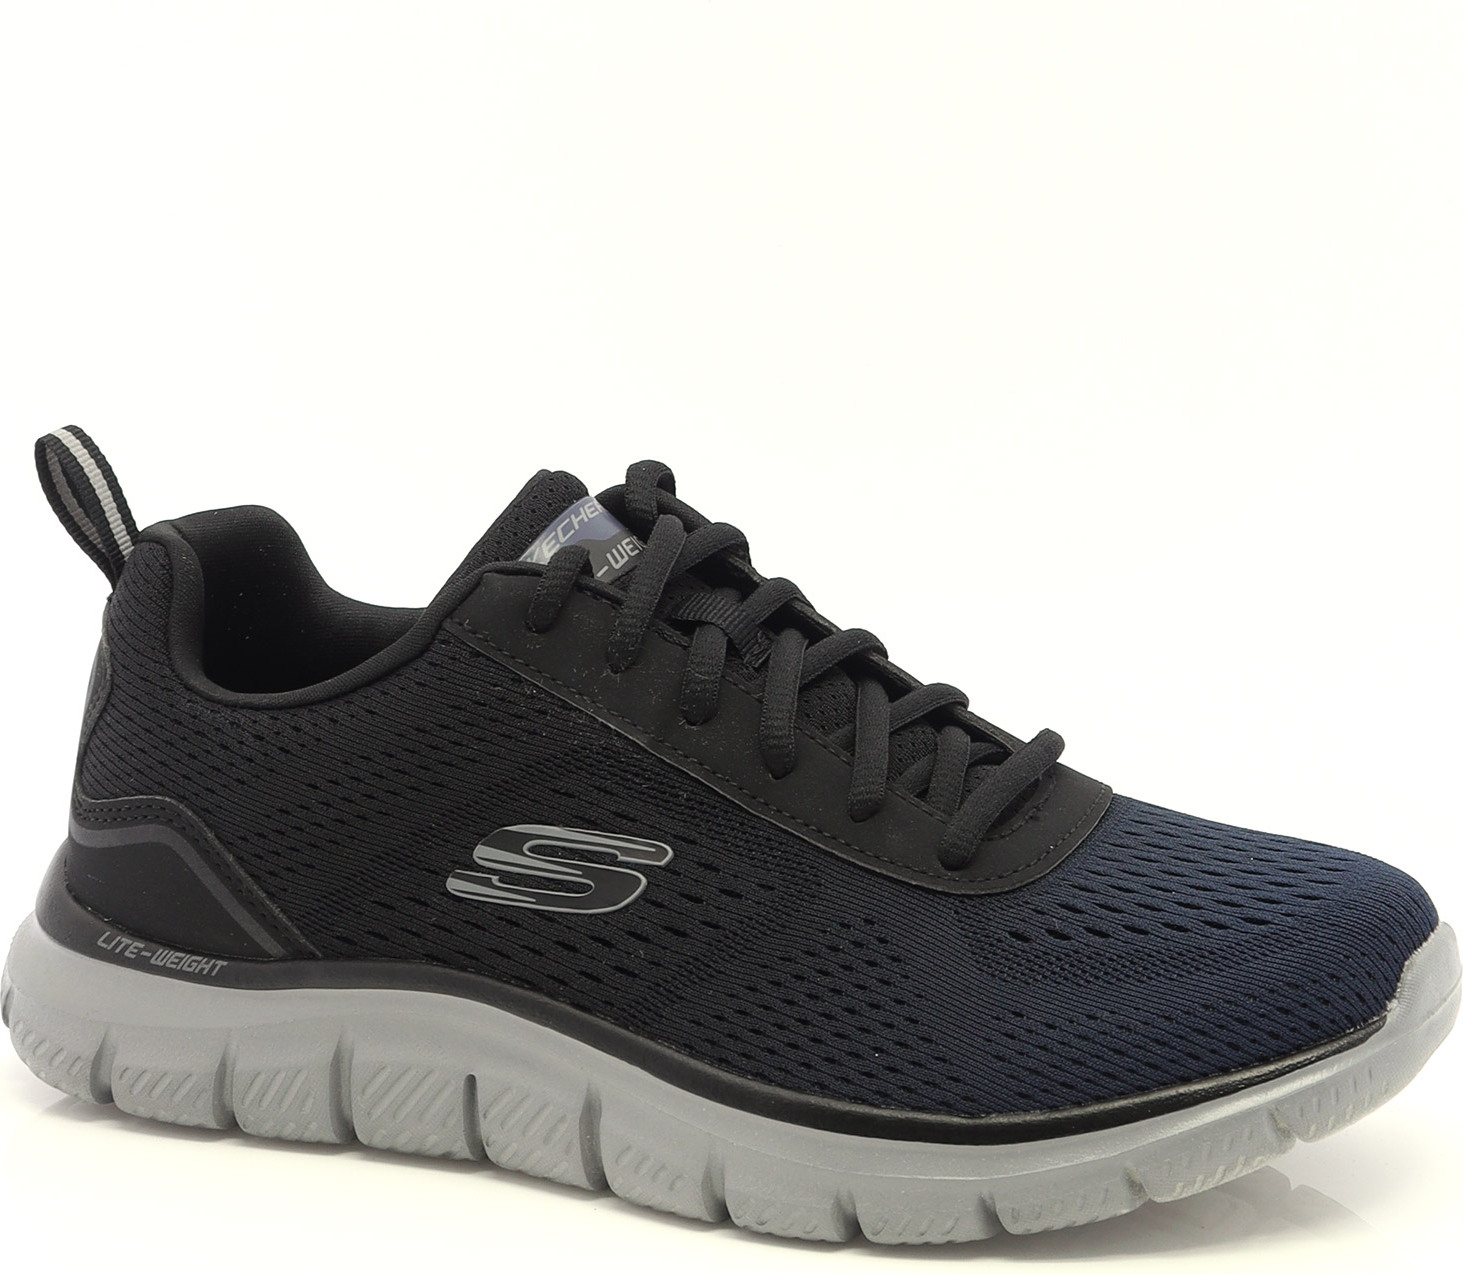 The canvas practical shoes BOBS B Cute | Made by Skechers